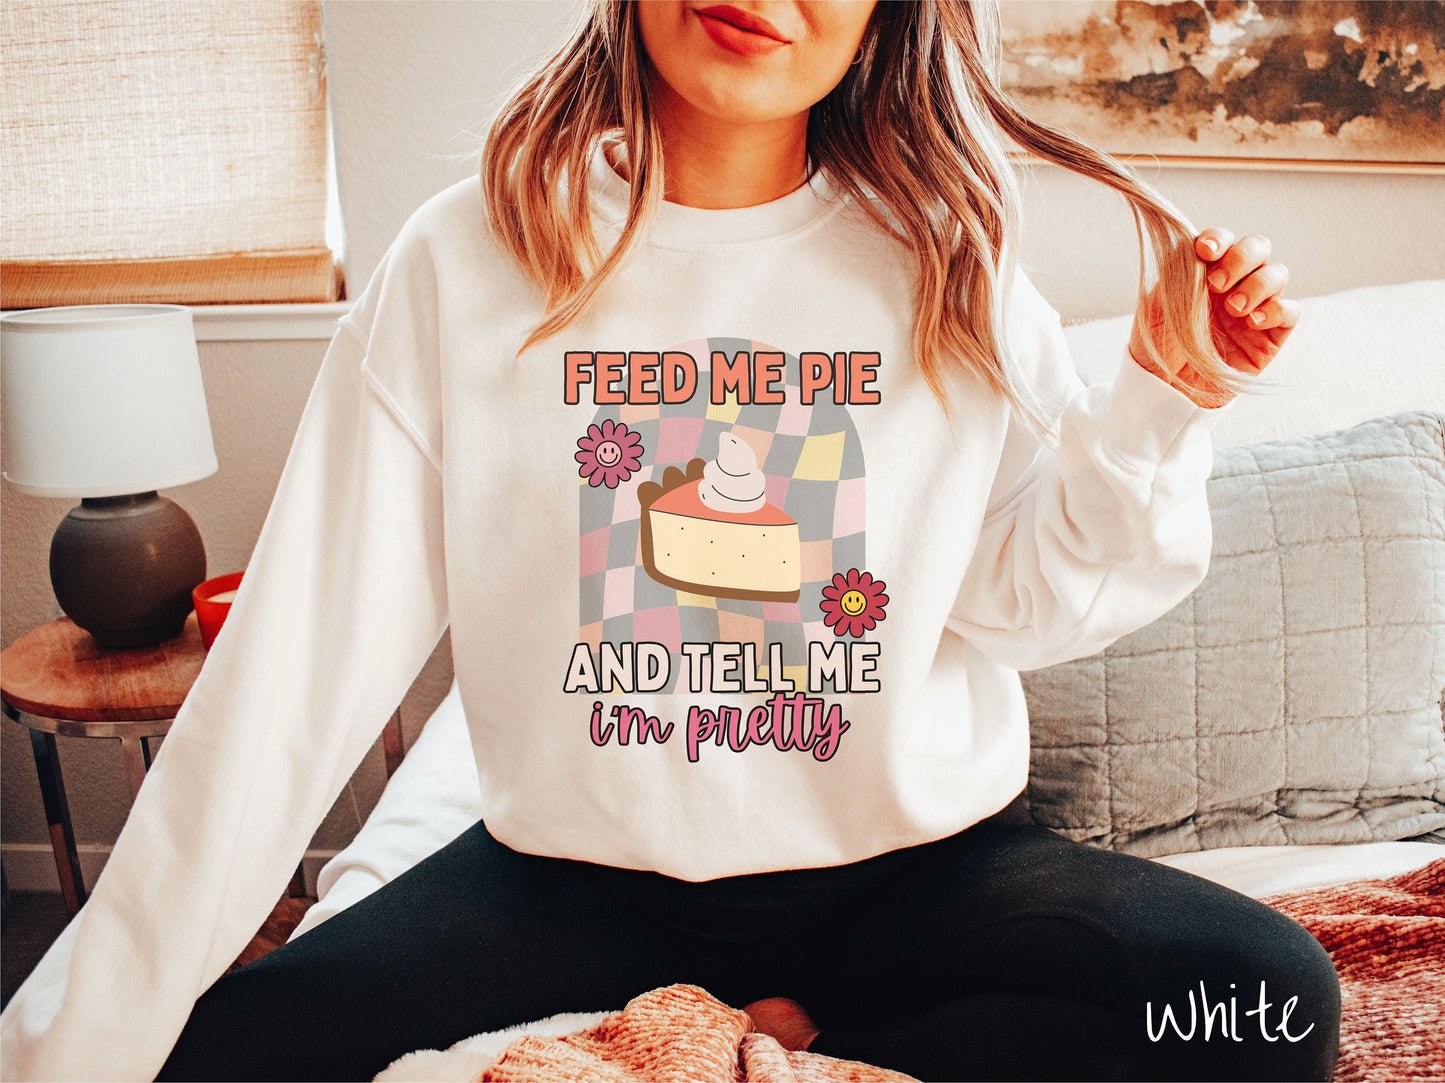 Feed Me Pie and Tell Me I'm Pretty Sweatshirt, Pie Shirt Thanksgiving, Gift for Thanksgiving, Family Dinner Tee, Turkey Feast Sweater